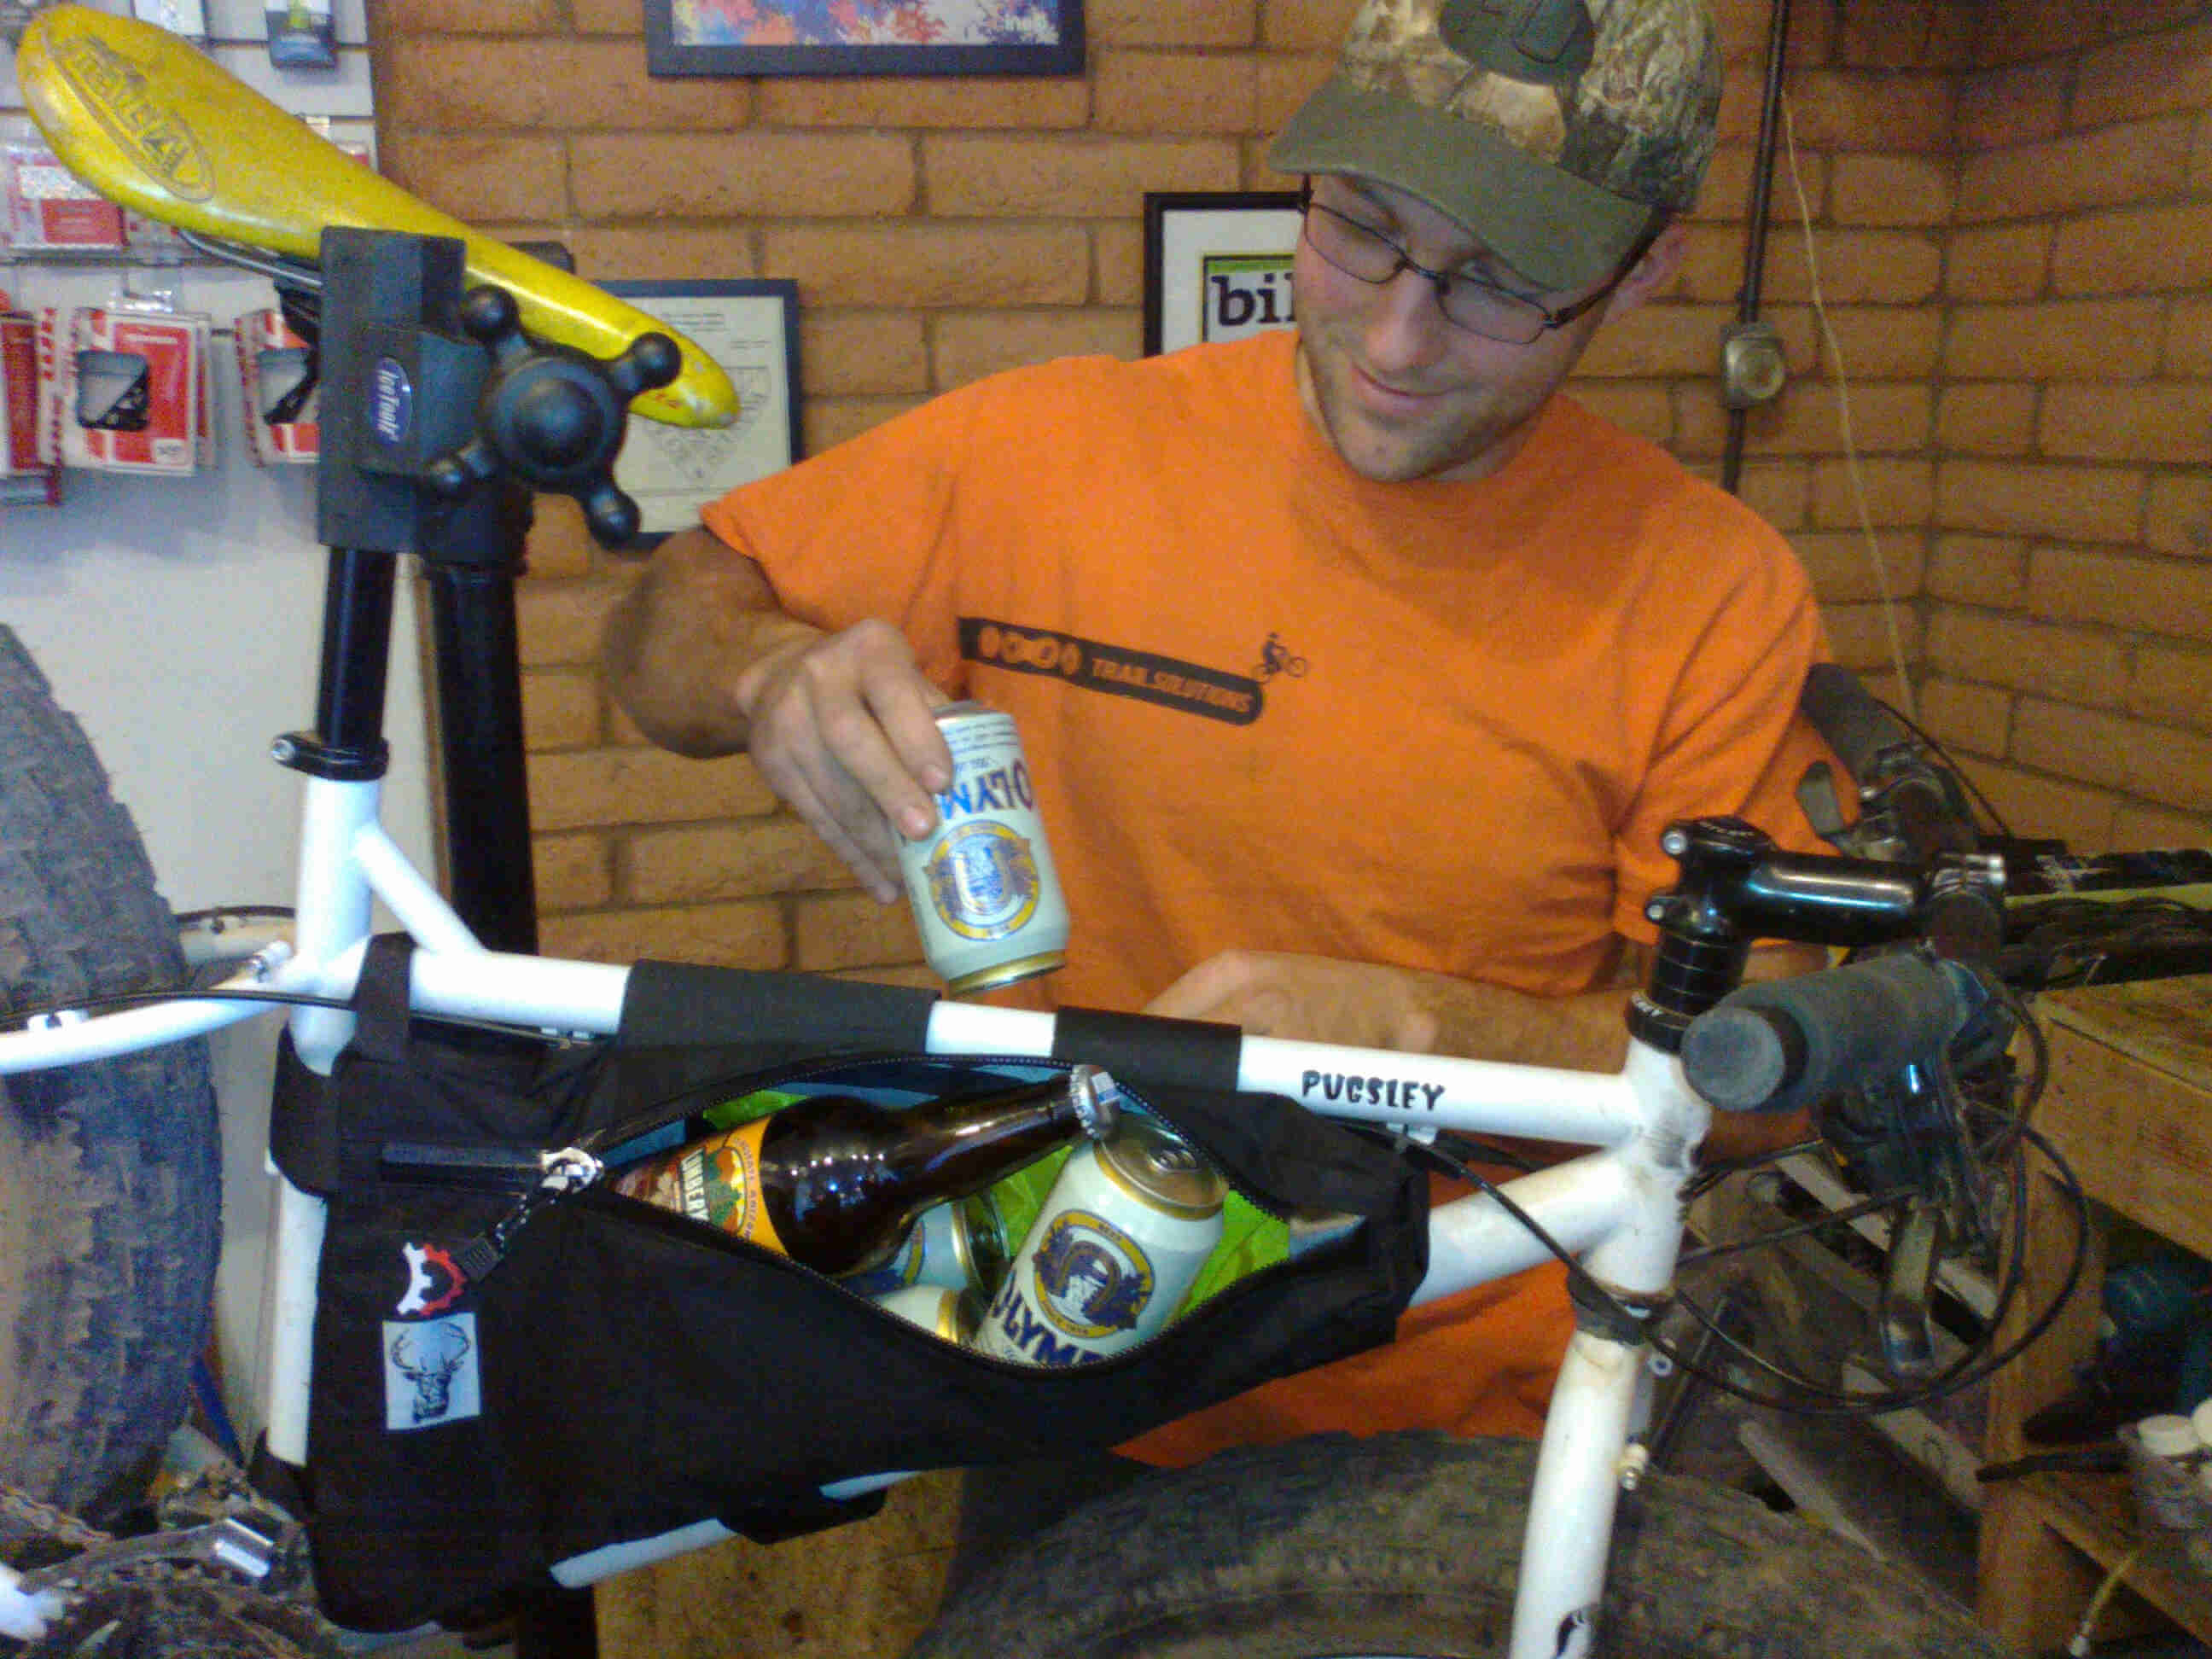 Right side view of a white Surly Pugsley fat bike, in a bike shop, with a person stuffing beer cans in the frame bag